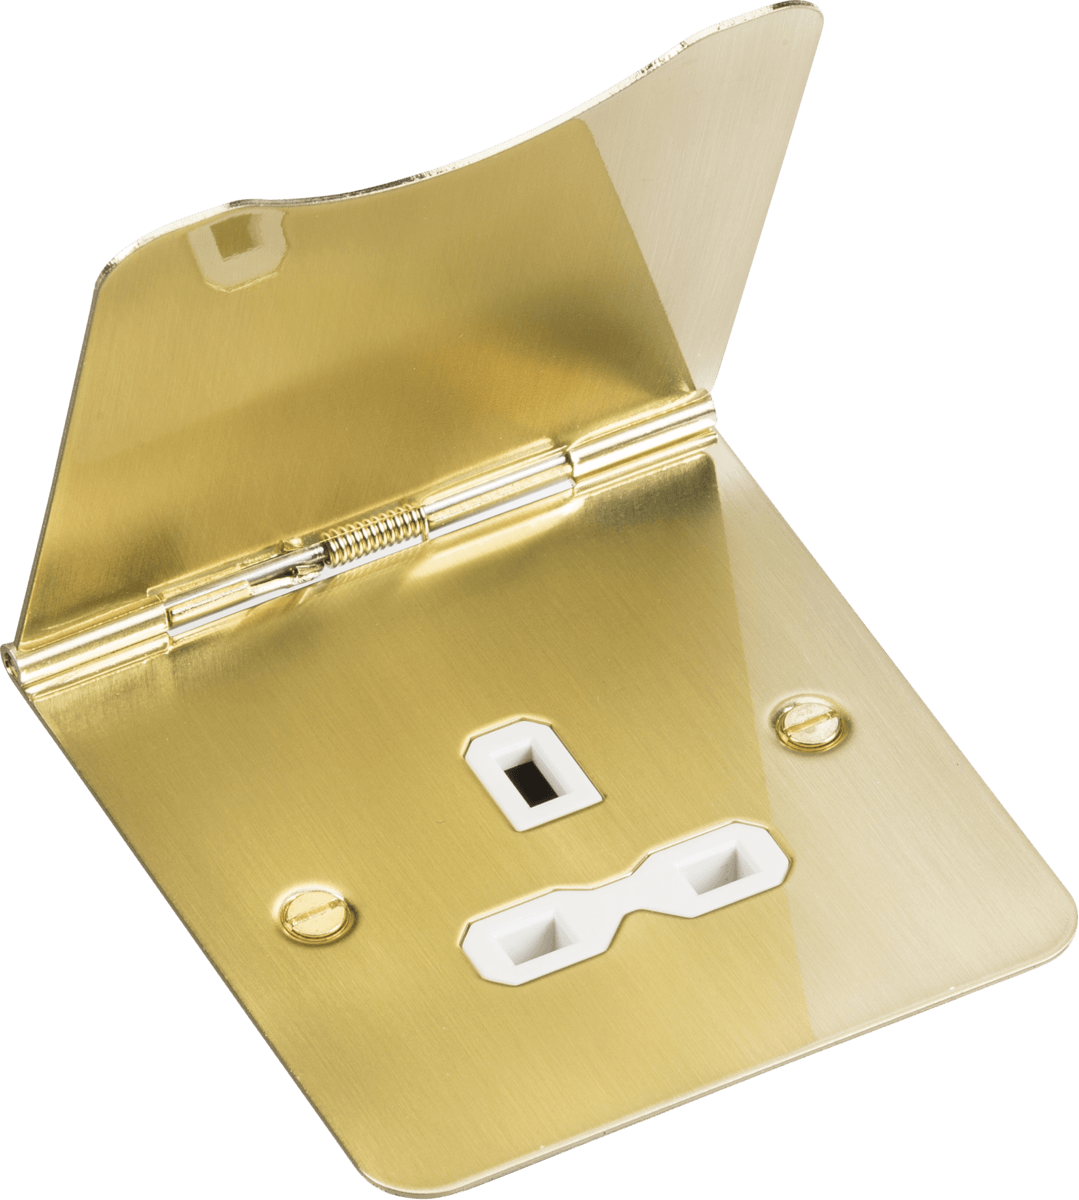 Knightsbridge 13A 1G Unswitched Floor Socket - Brushed Brass with White Insert